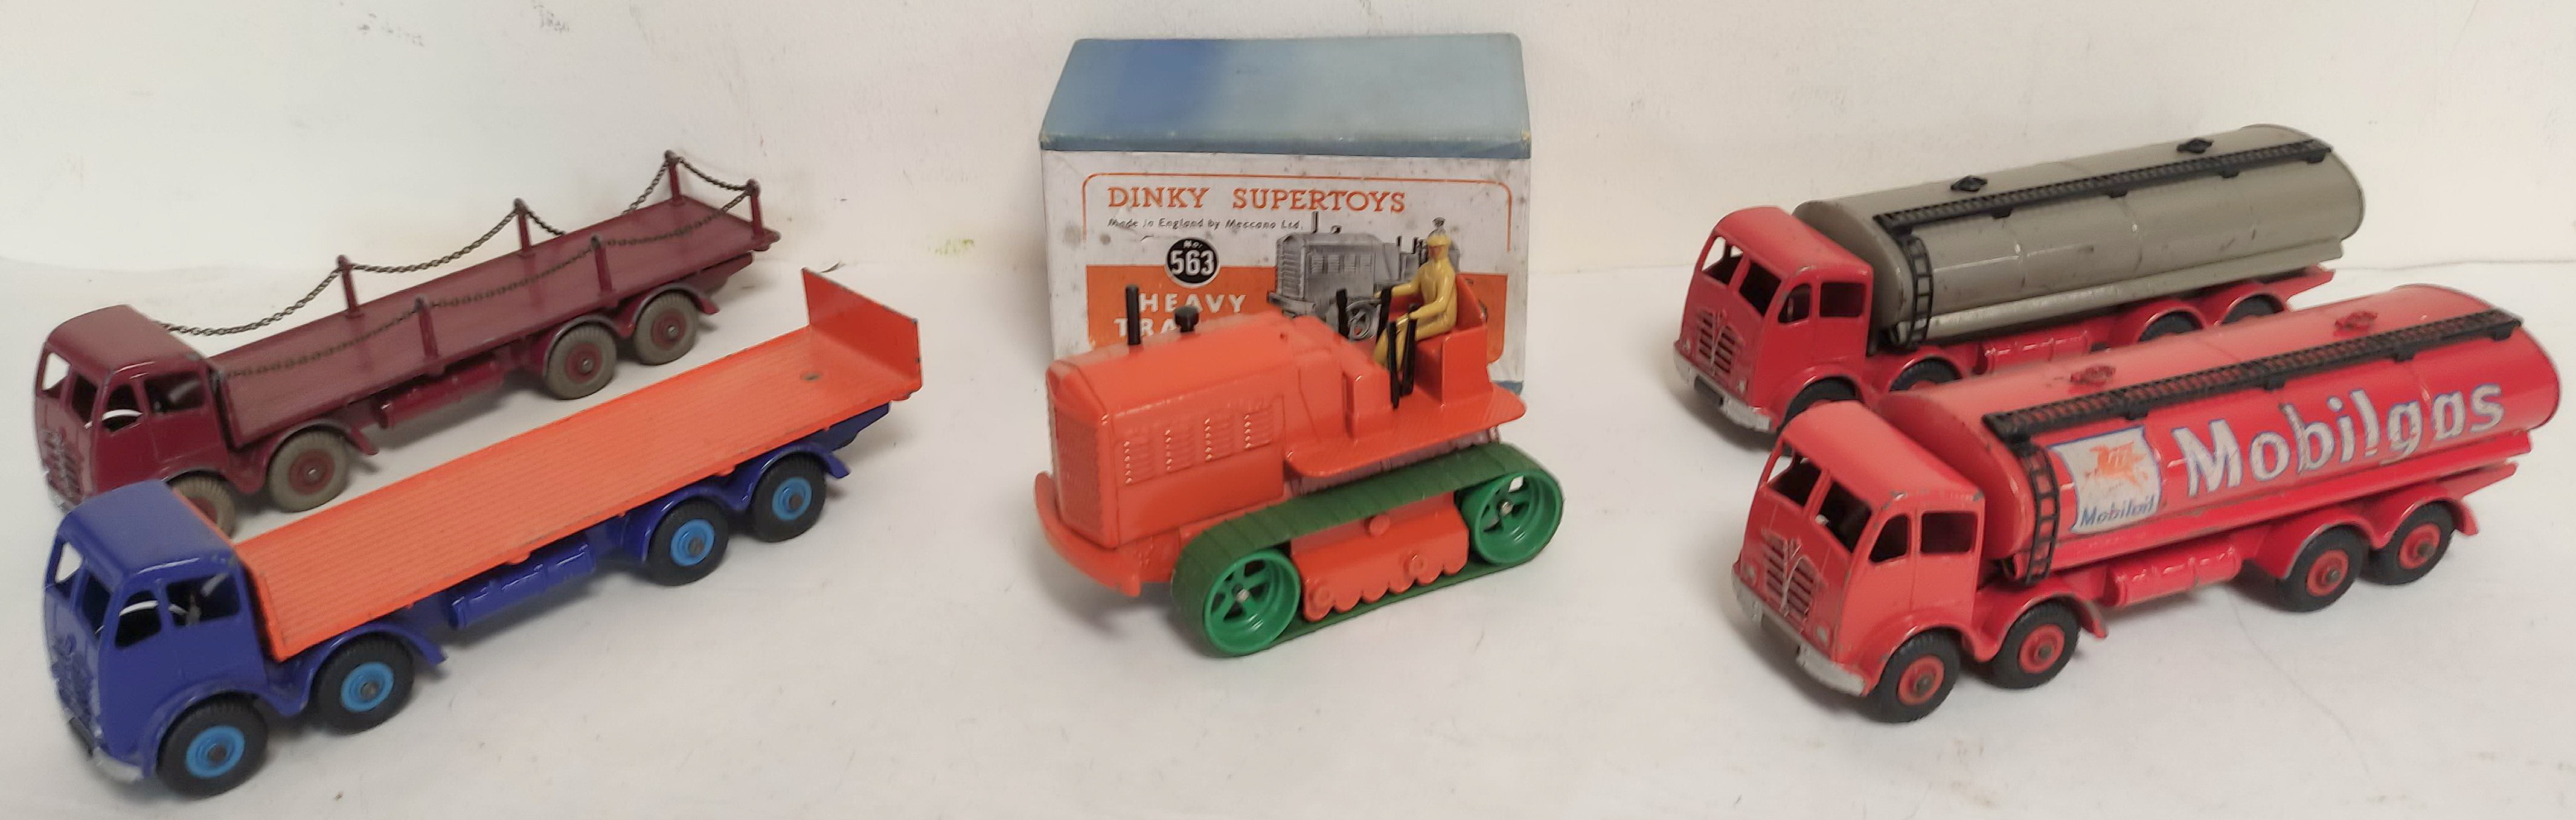 Five vintage Dinky Supertoys Foden diecast model vehicles. To include a boxed Heavy Tractor No563,